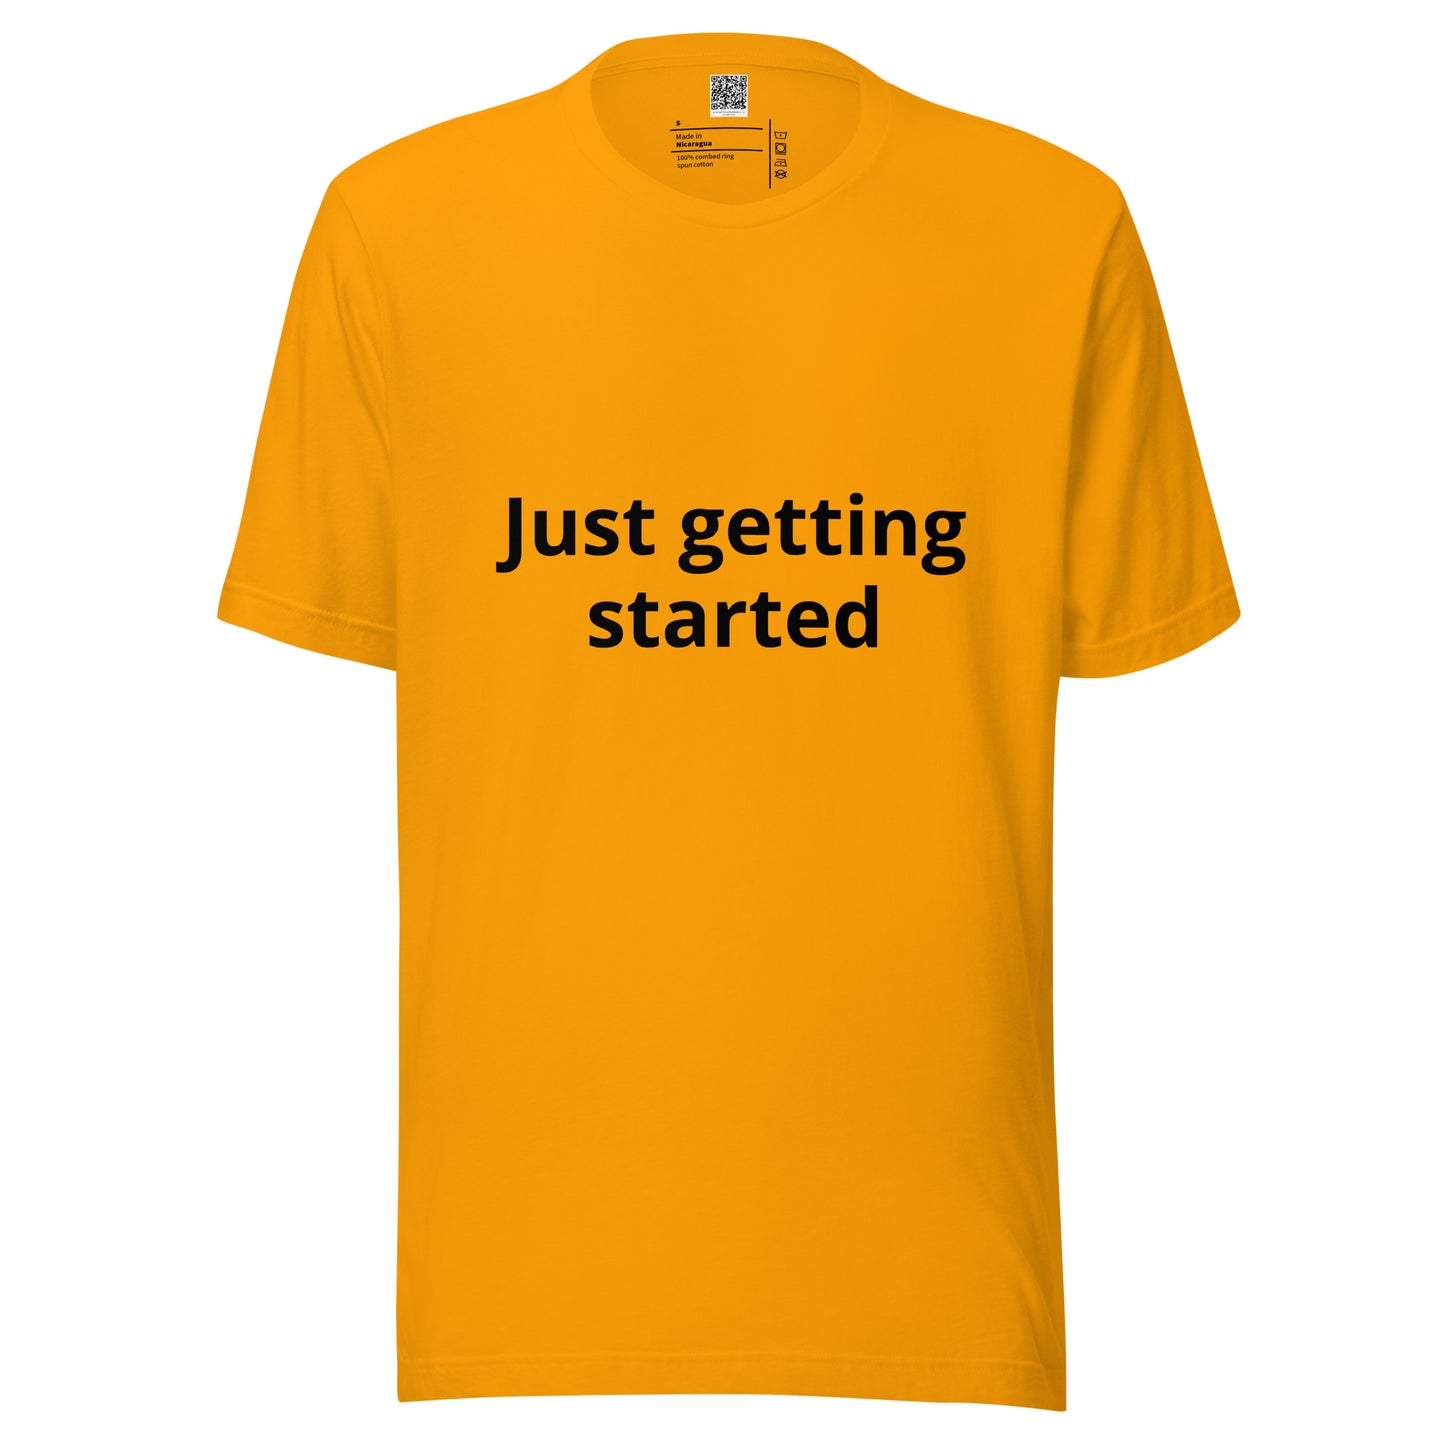 Unisex t-shirt - Just getting started